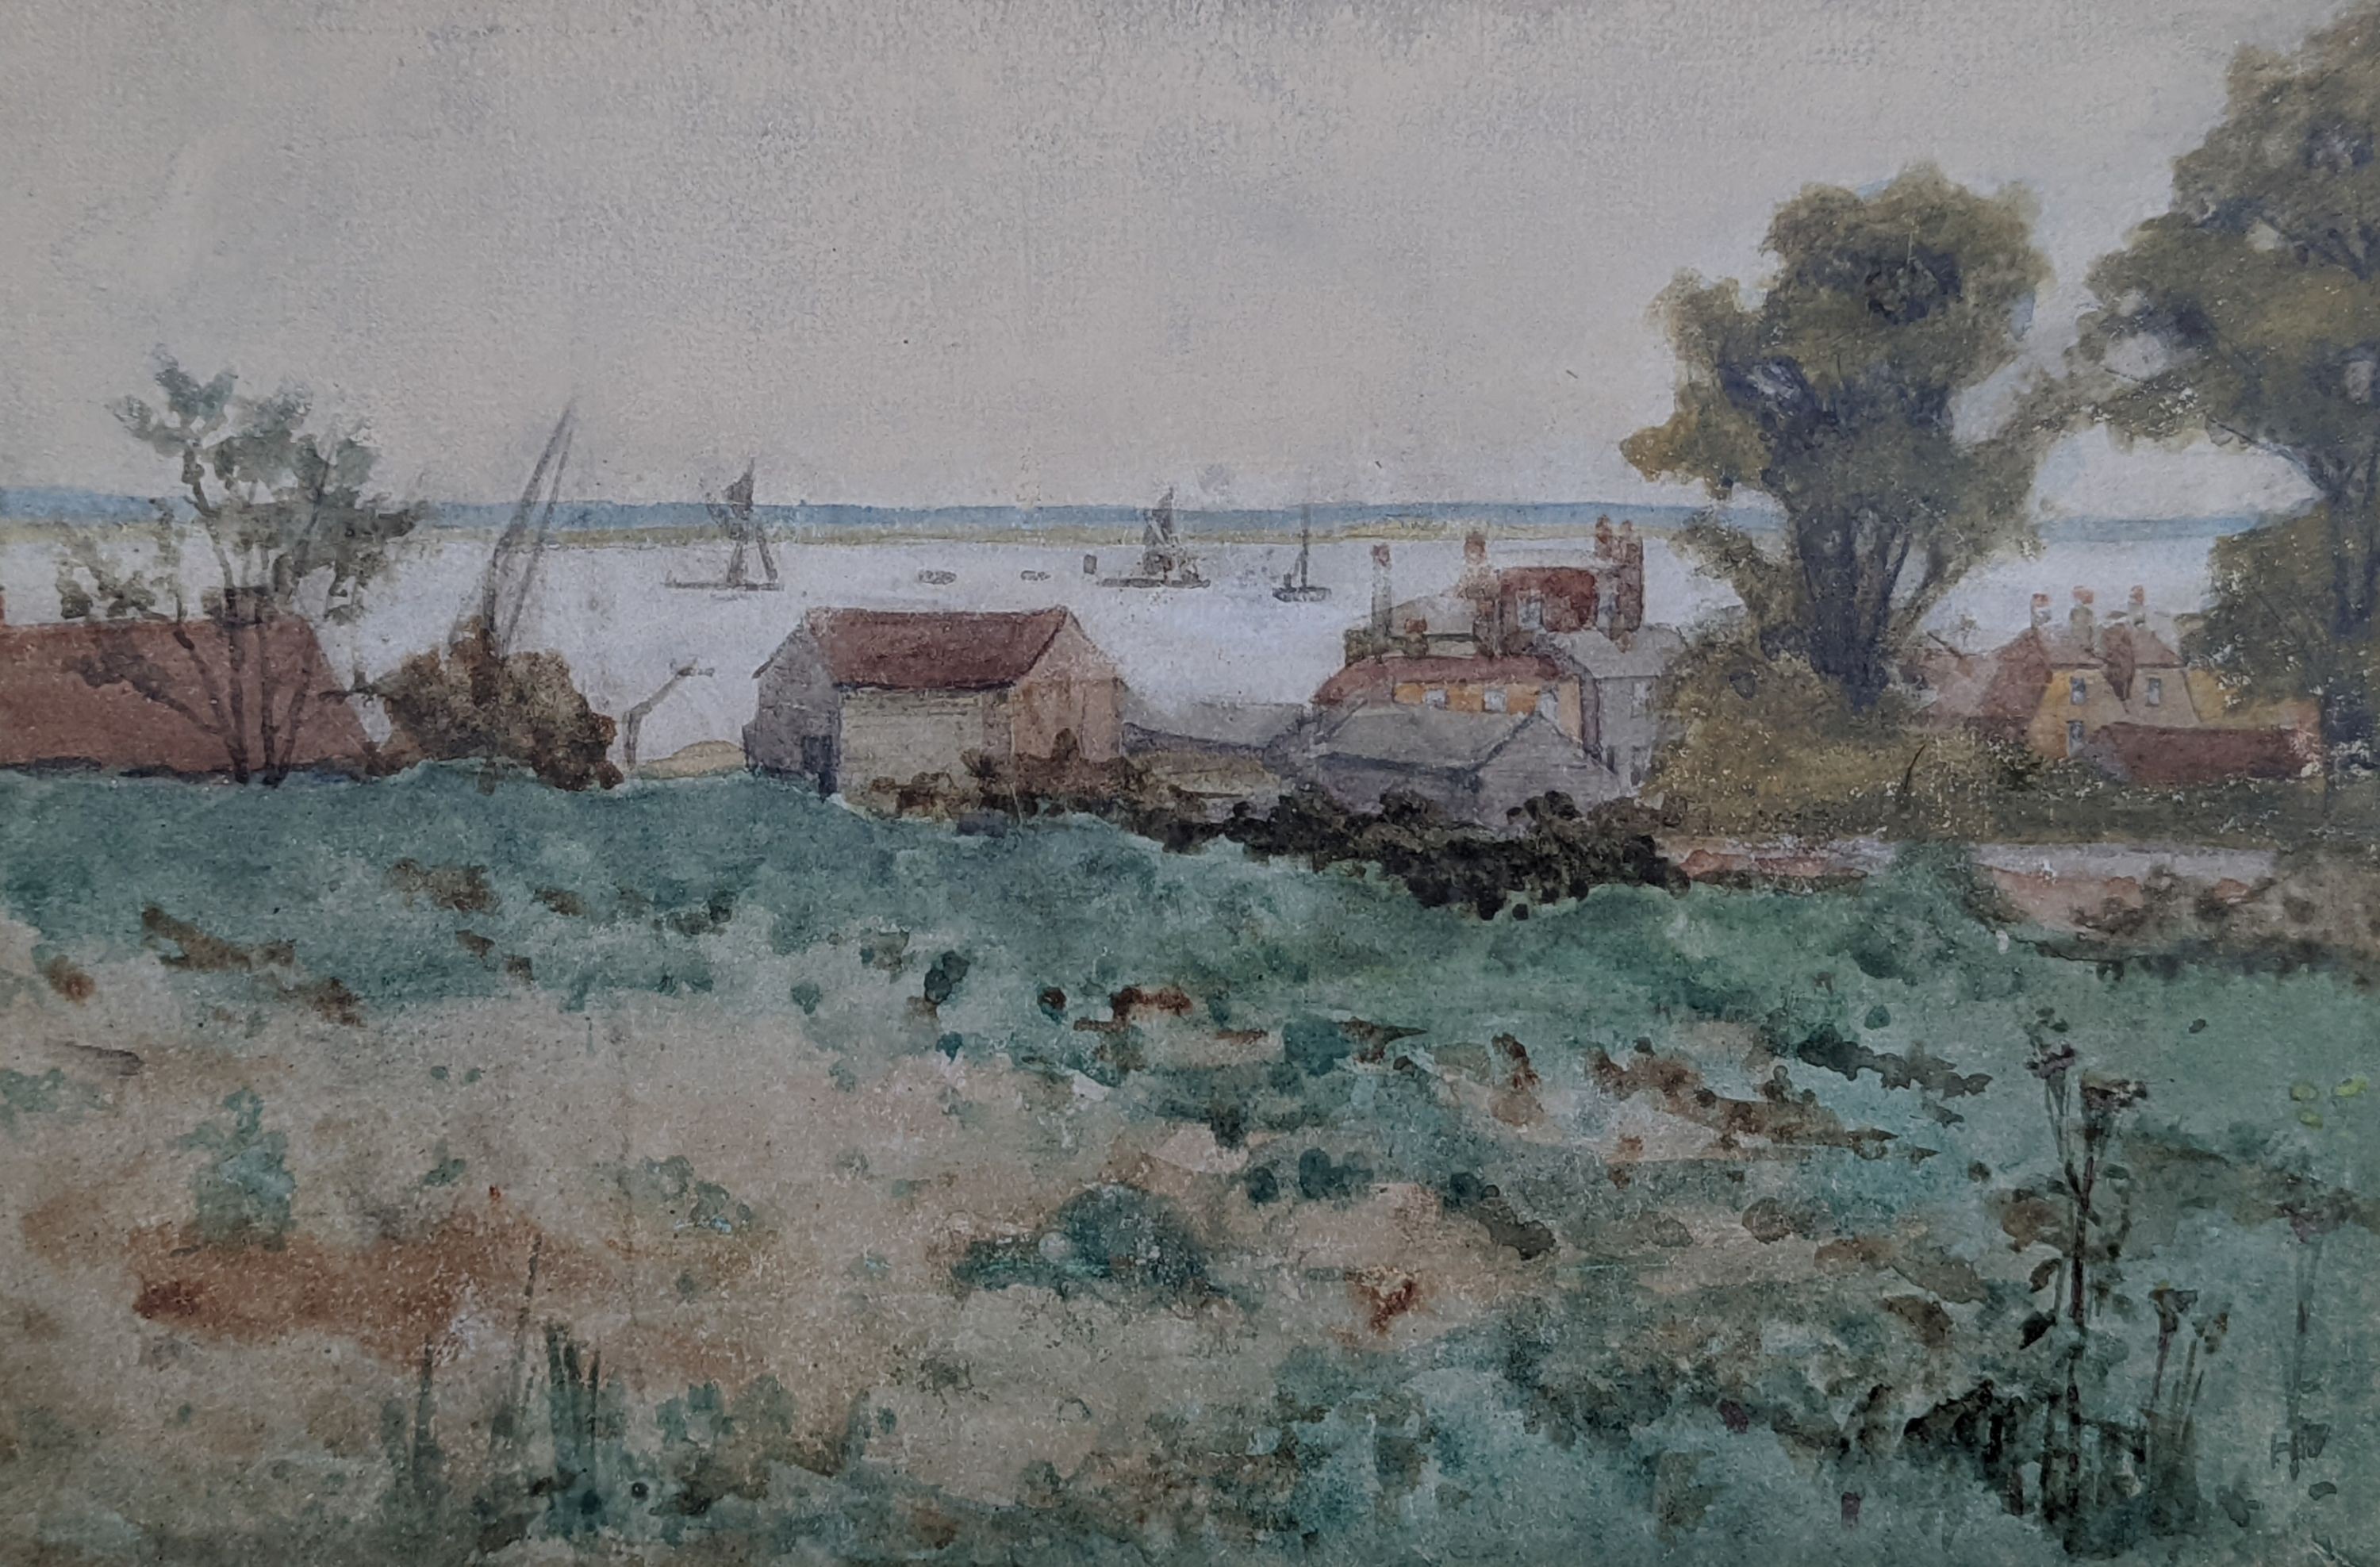 James Frederick Darley (1847-1932), watercolour, The Medway Estuary, 17 x 26cm